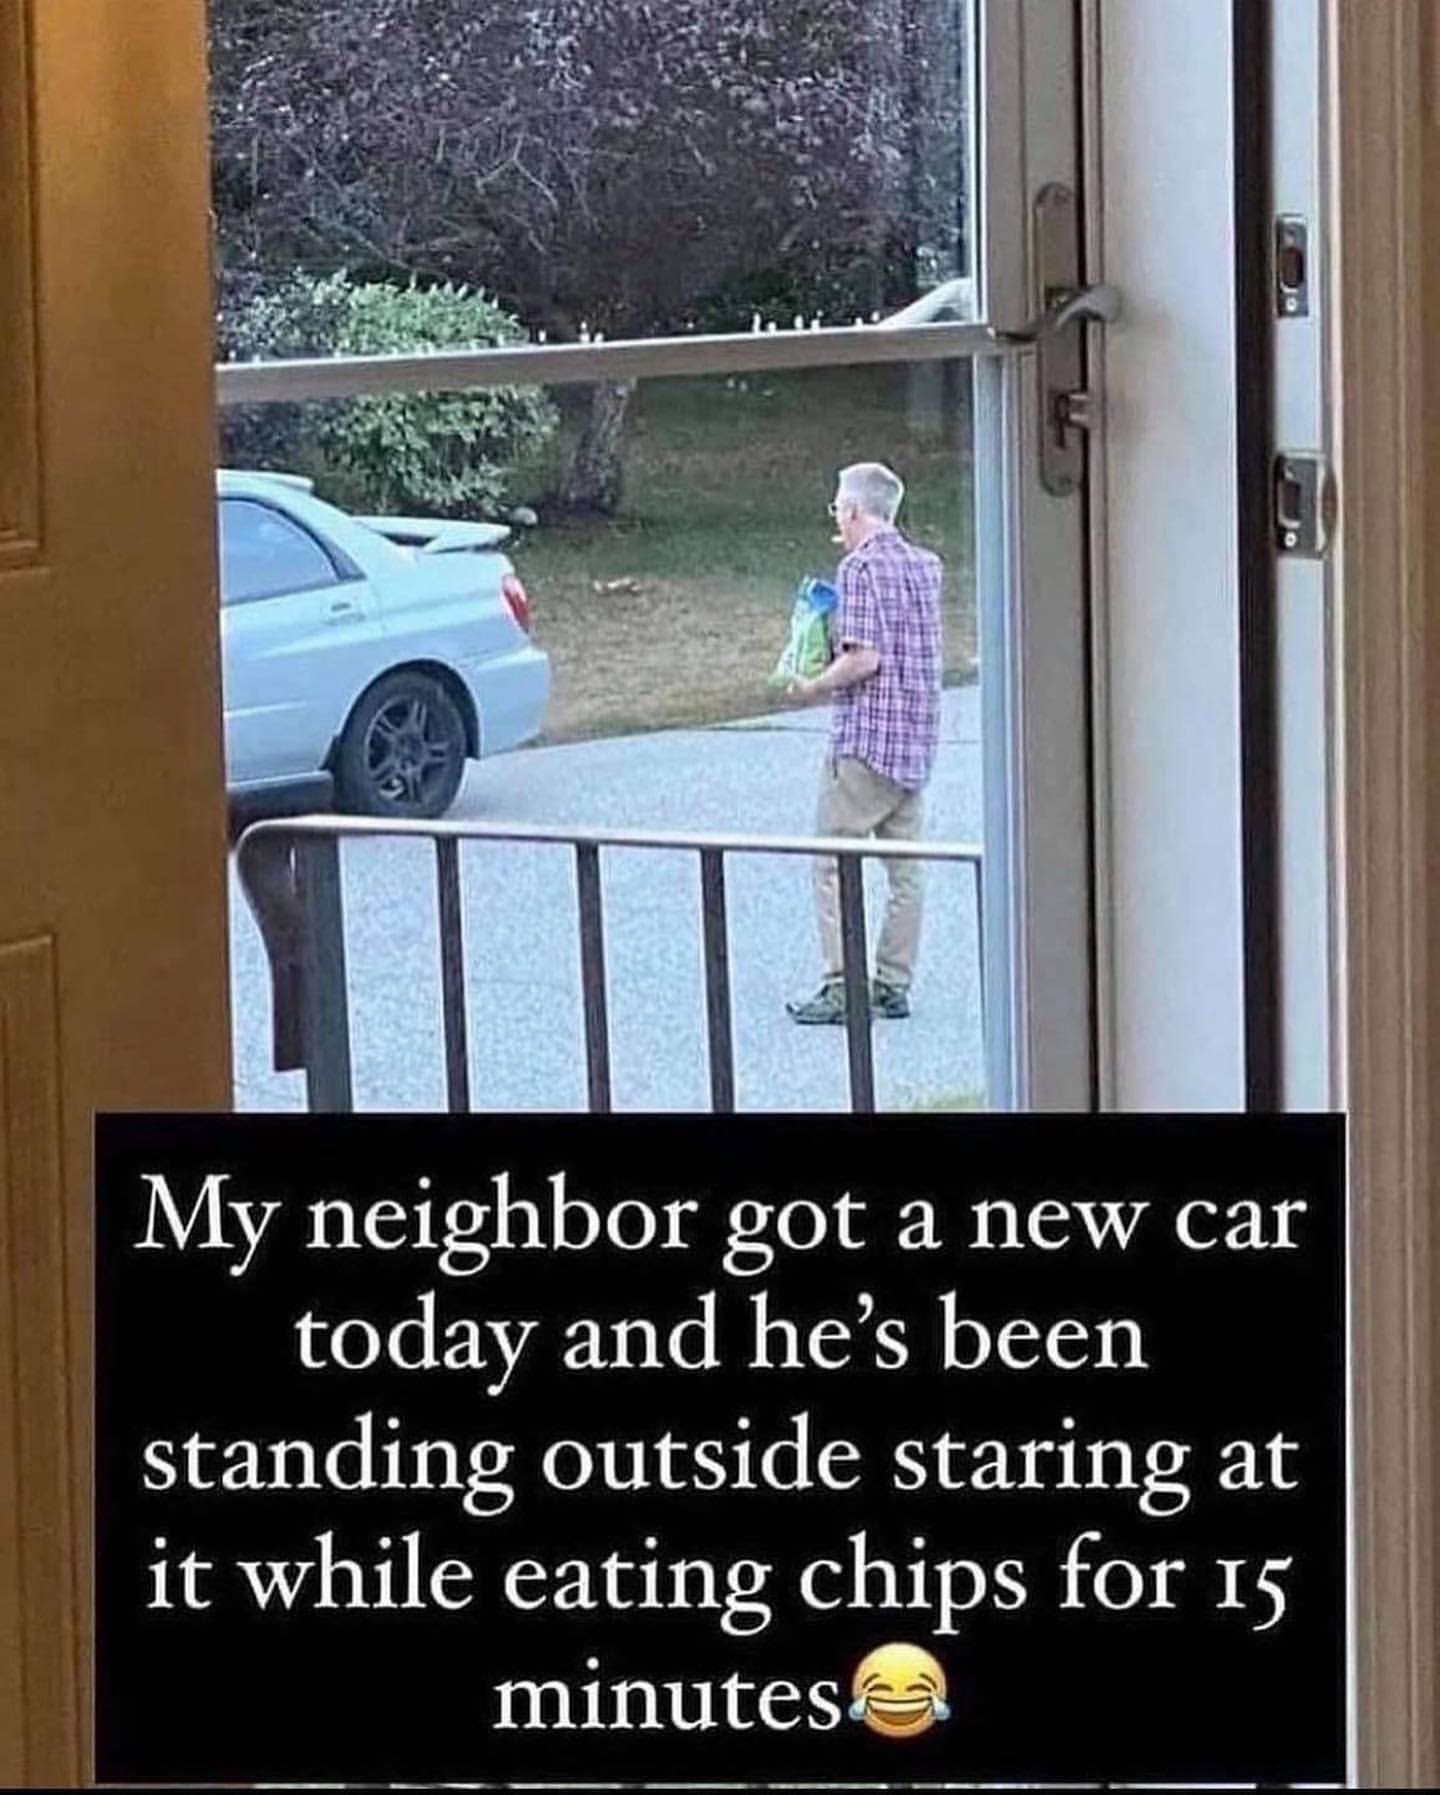 My neighbor got a new car today and he's been standing outside staring at it while eating chips for 15 minutes.